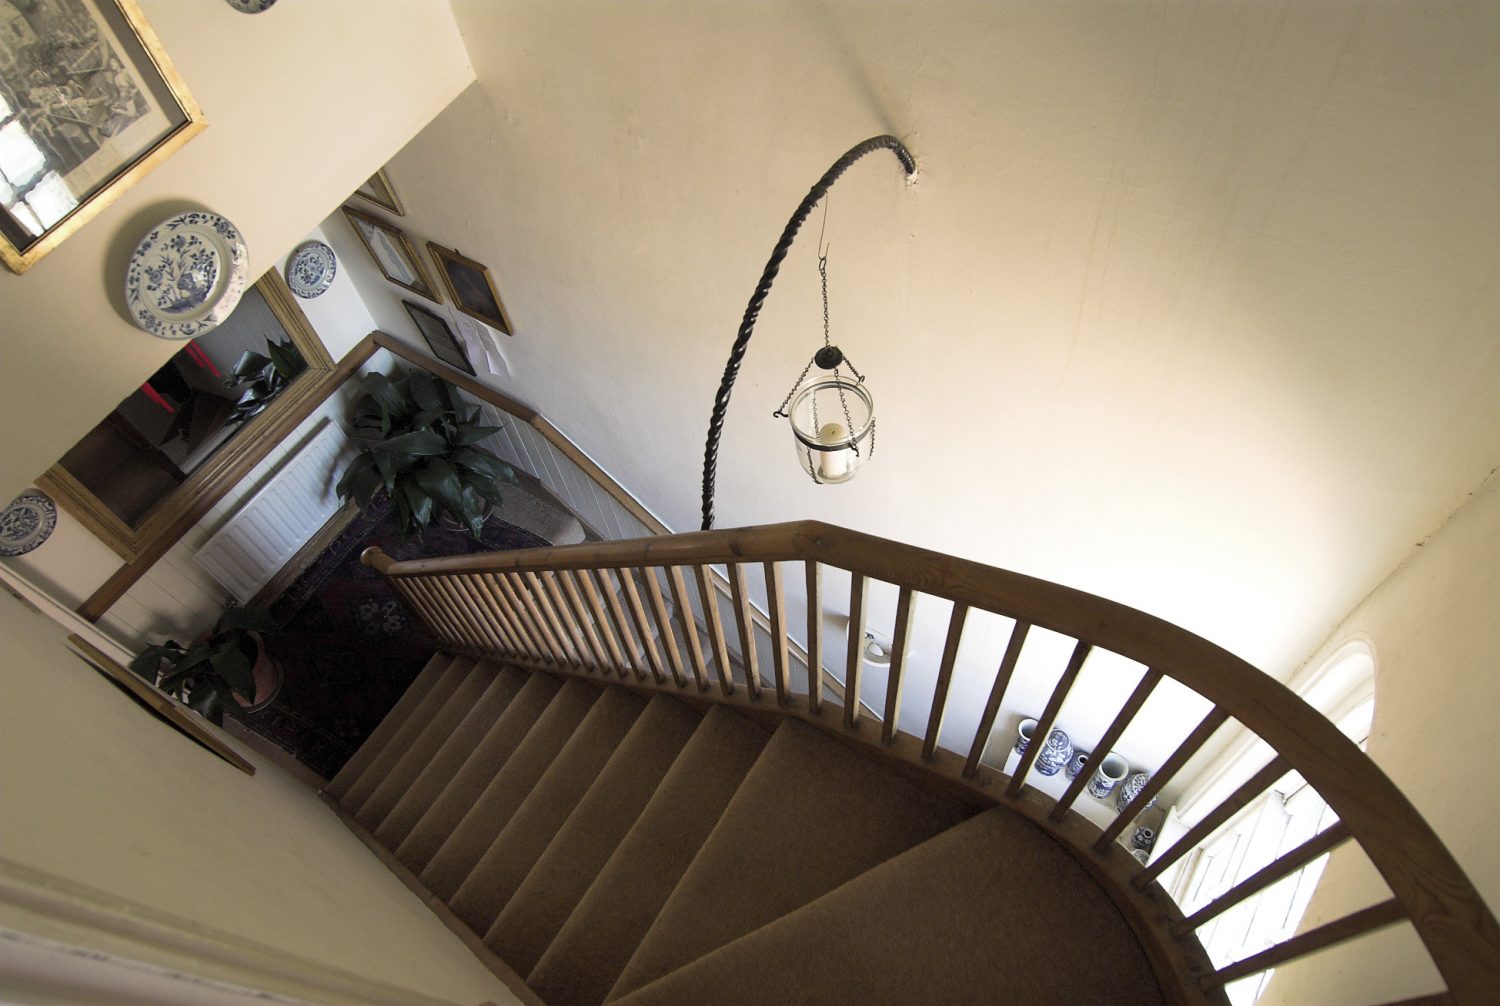 The vertigo-inducing staircase leads up to Bob’s bedroom from the first floor